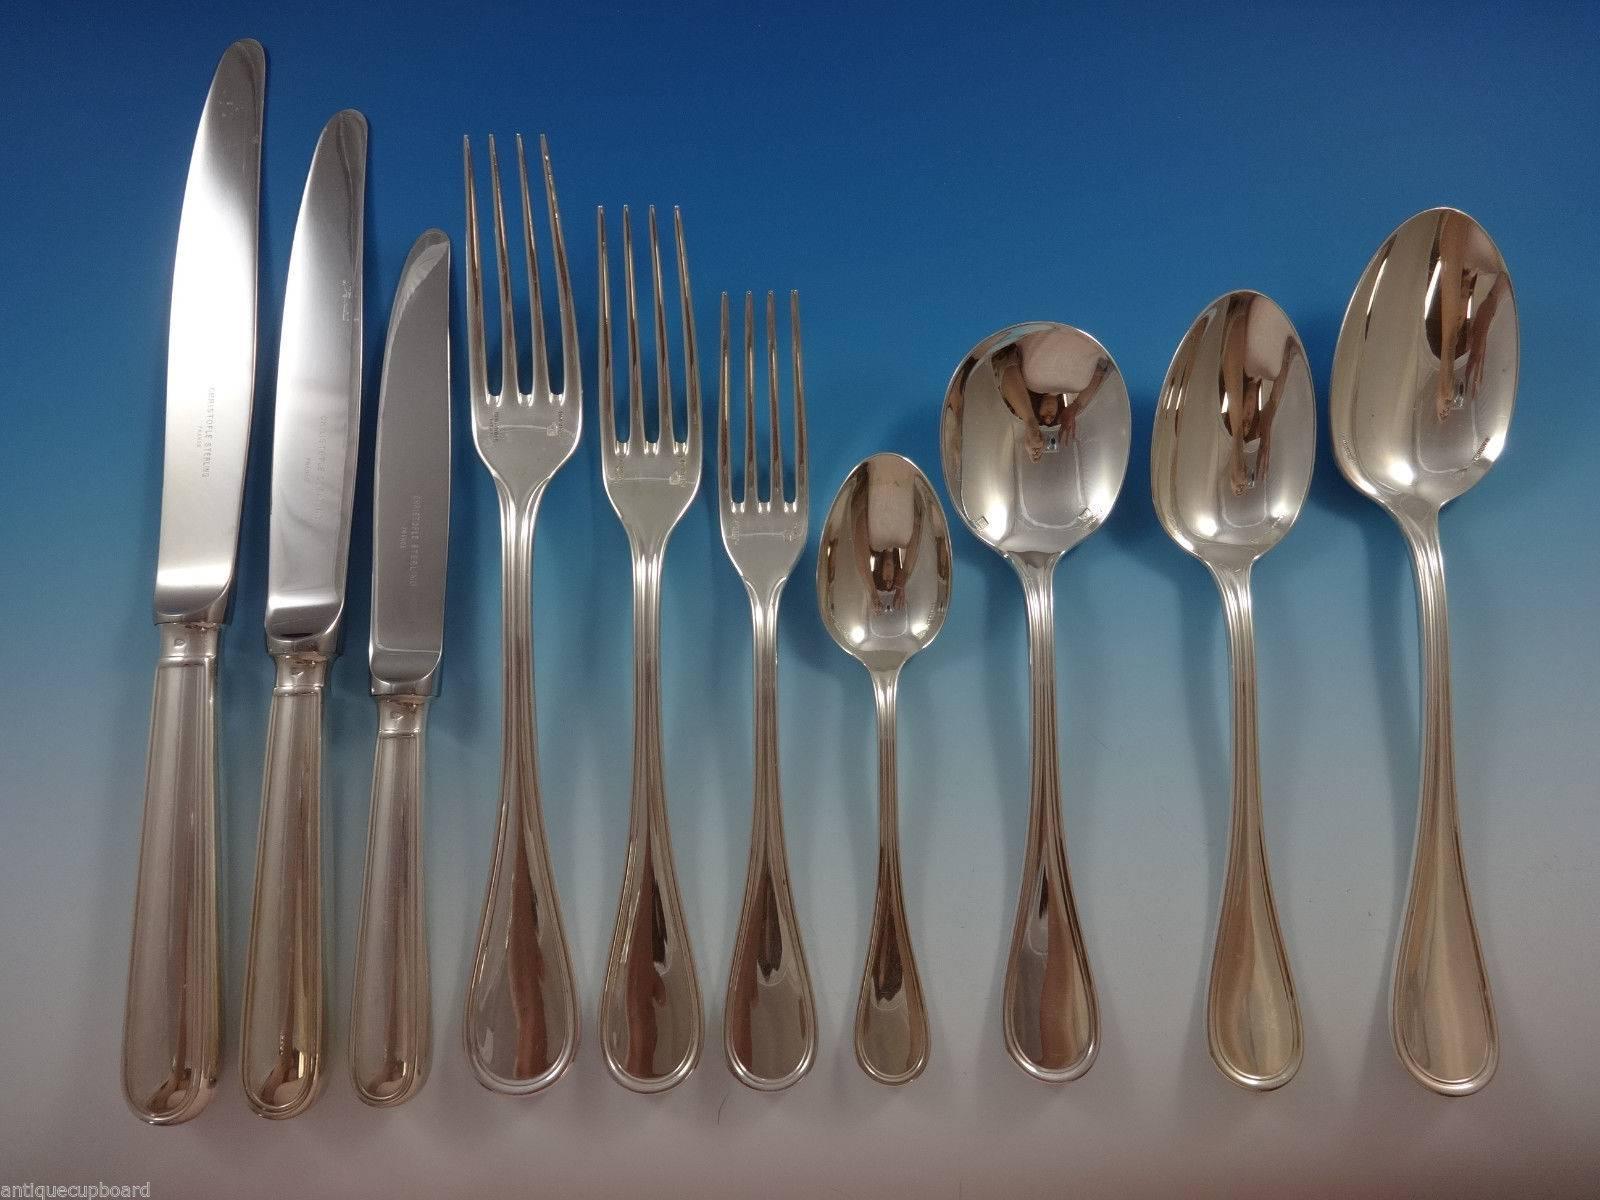 Albi by Christofle sterling set.

Christofle French silver flatware has been crafted by master artisans since 1830.

The revolutionary style and character of Christofle dinnerware comes from collaborations with groundbreaking architects,